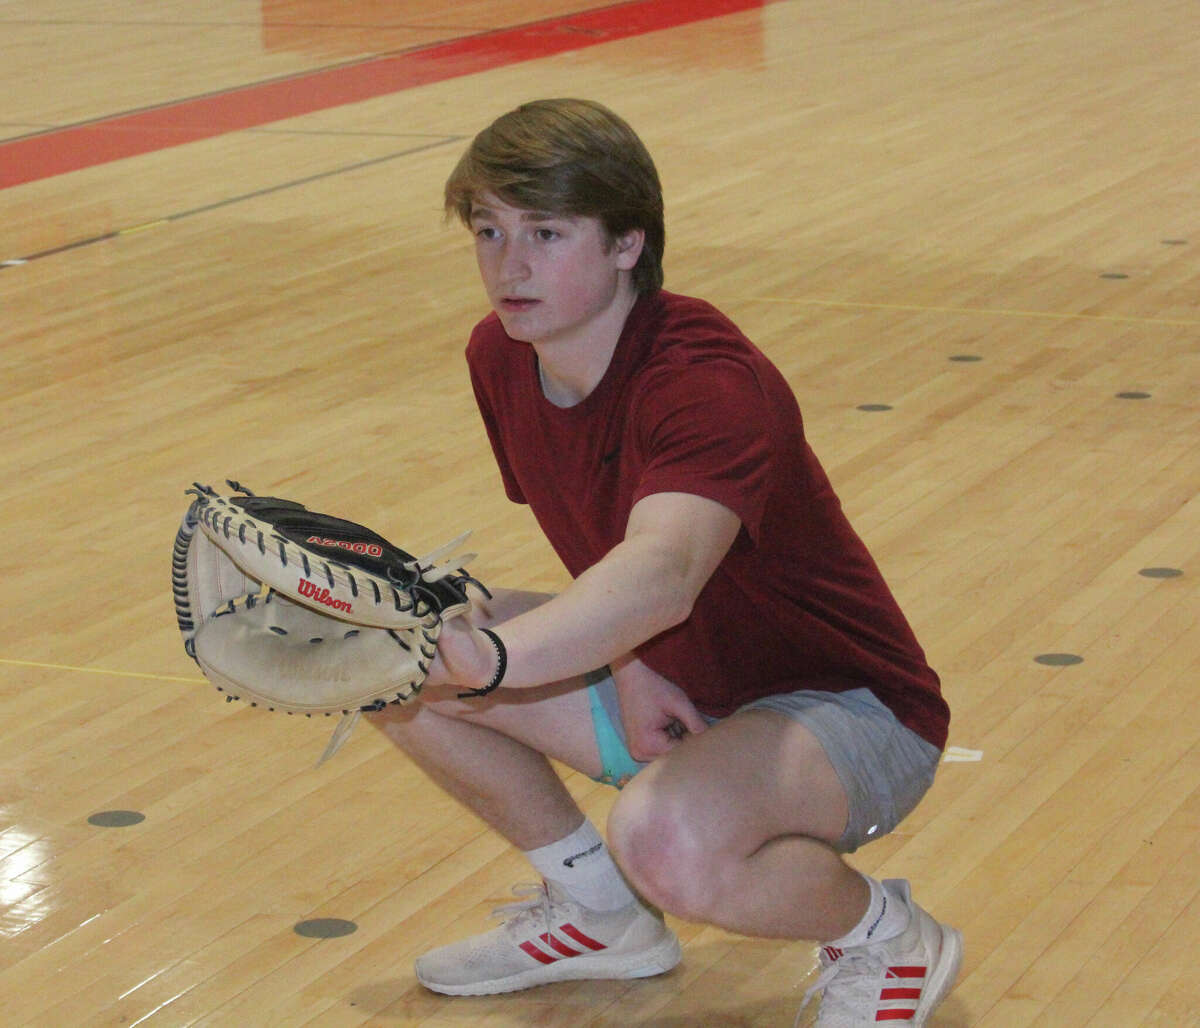 Big Rapids junior Wil Strickler works on his catching in the high school's auxiliary gym during a recent practice.